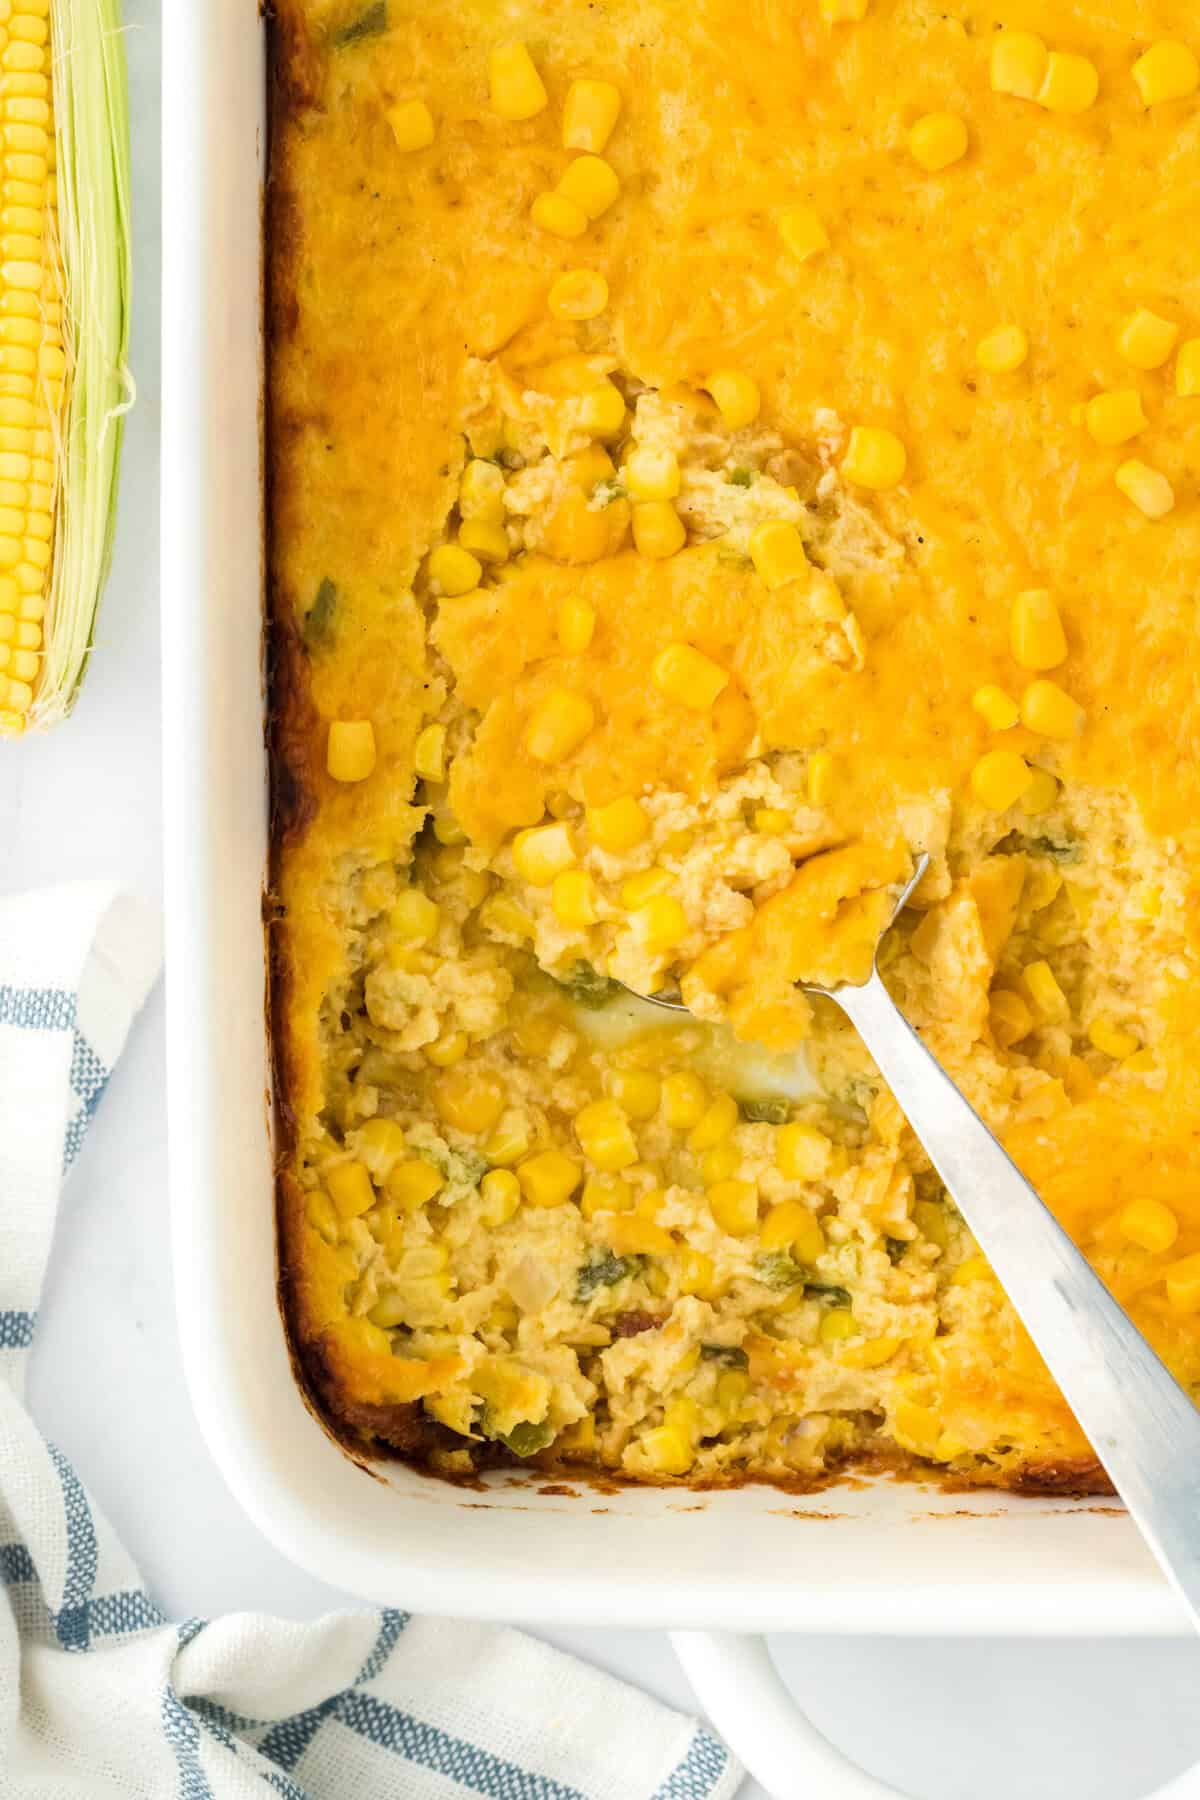 Southern corn pudding on a white background with a large spoon digging into it to serve